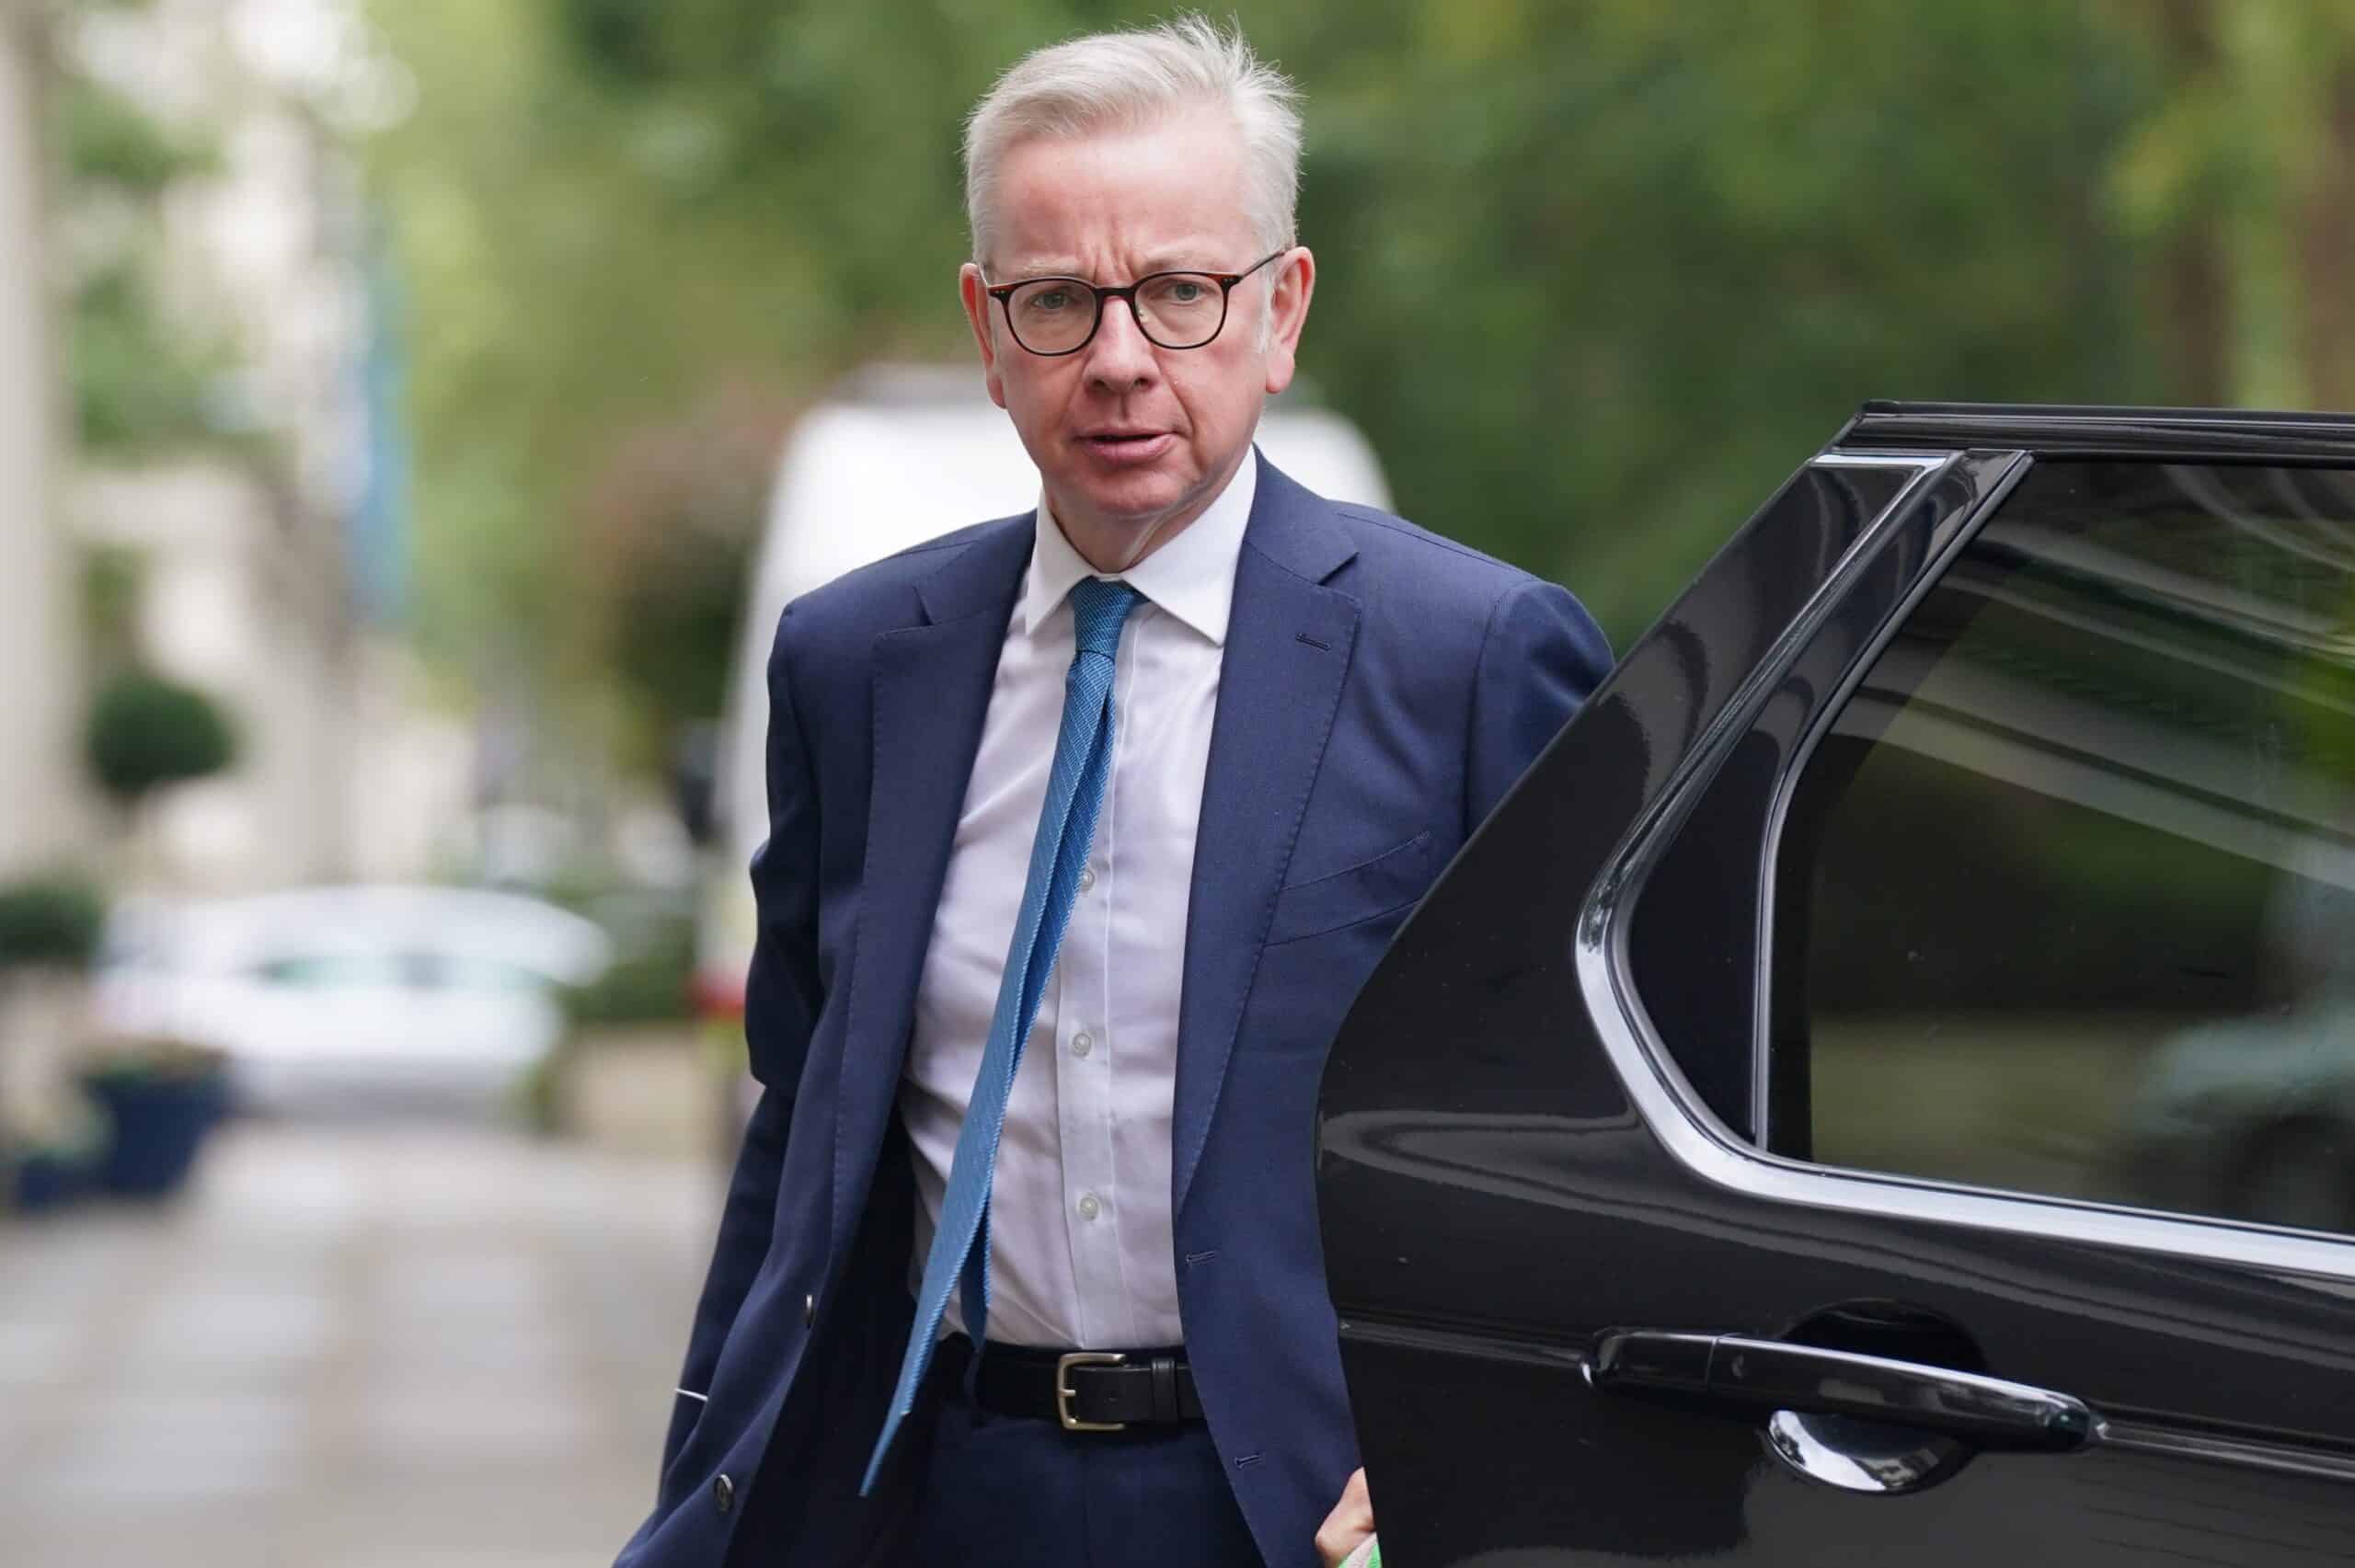 Gove claims Brexit planning HELPED prepare for Covid pandemic